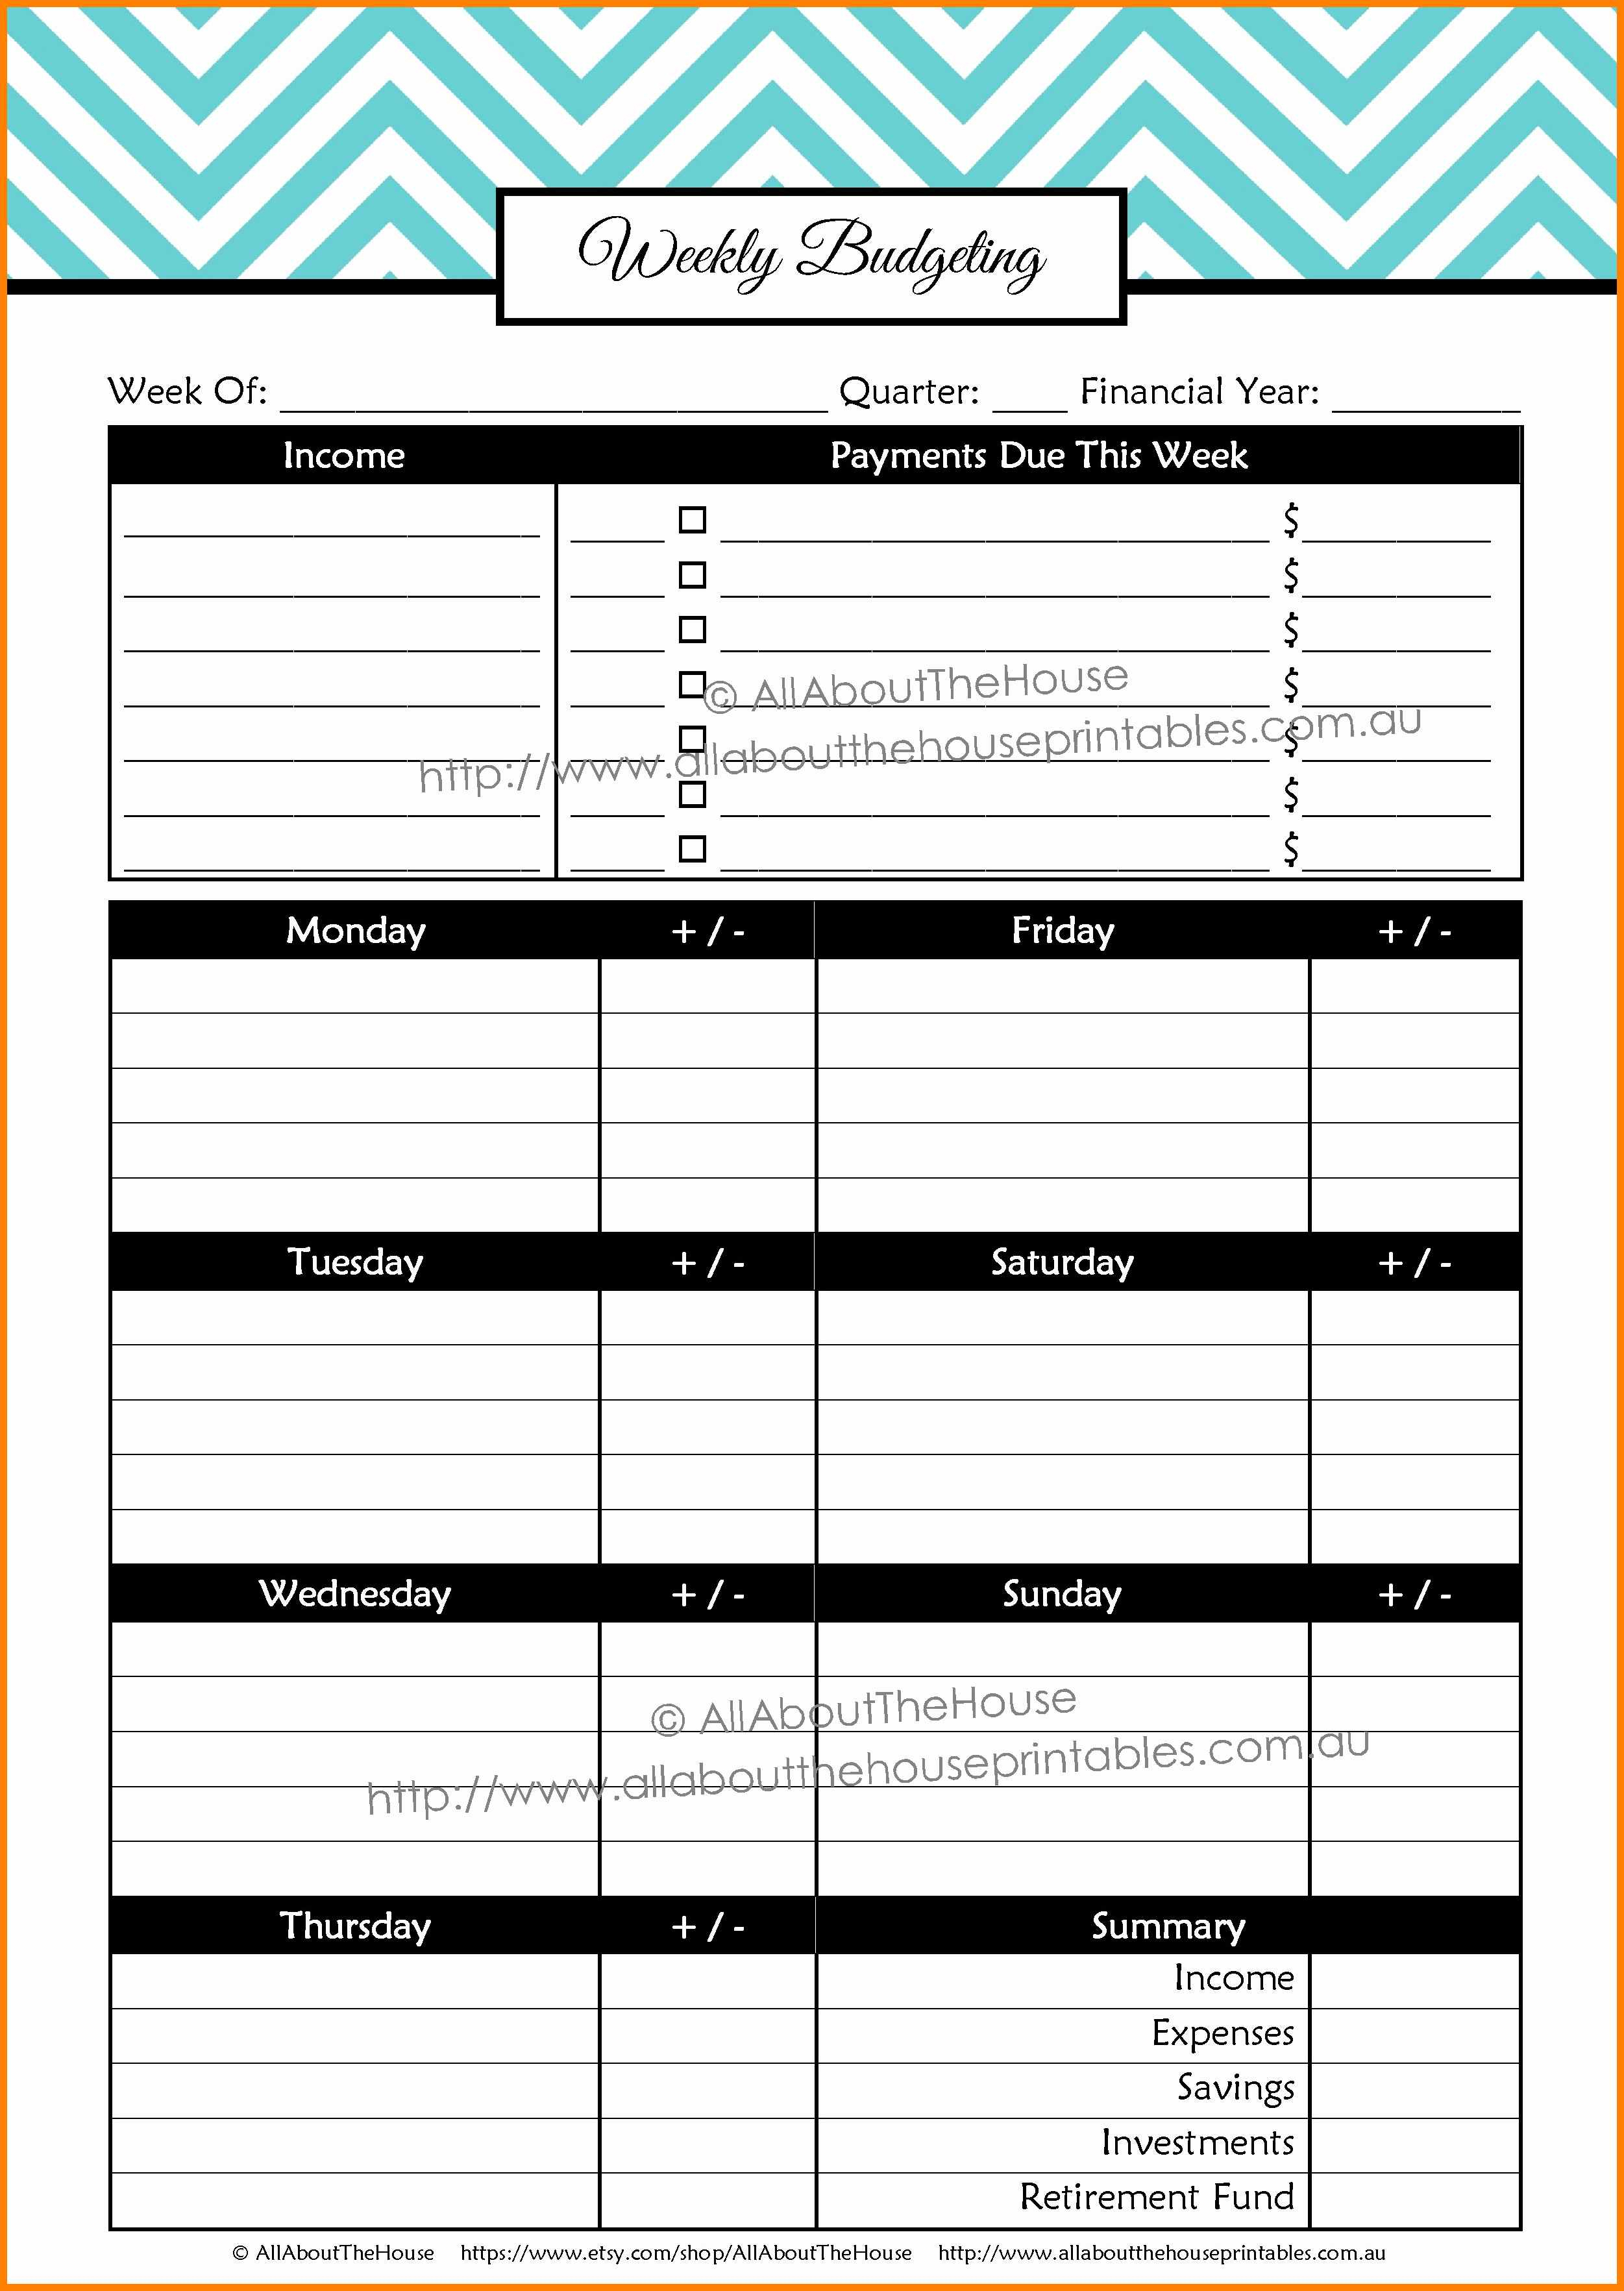 Bill Manager Spreadsheet Within 13+ Free Bill Management Spreadsheet  Credit Spreadsheet